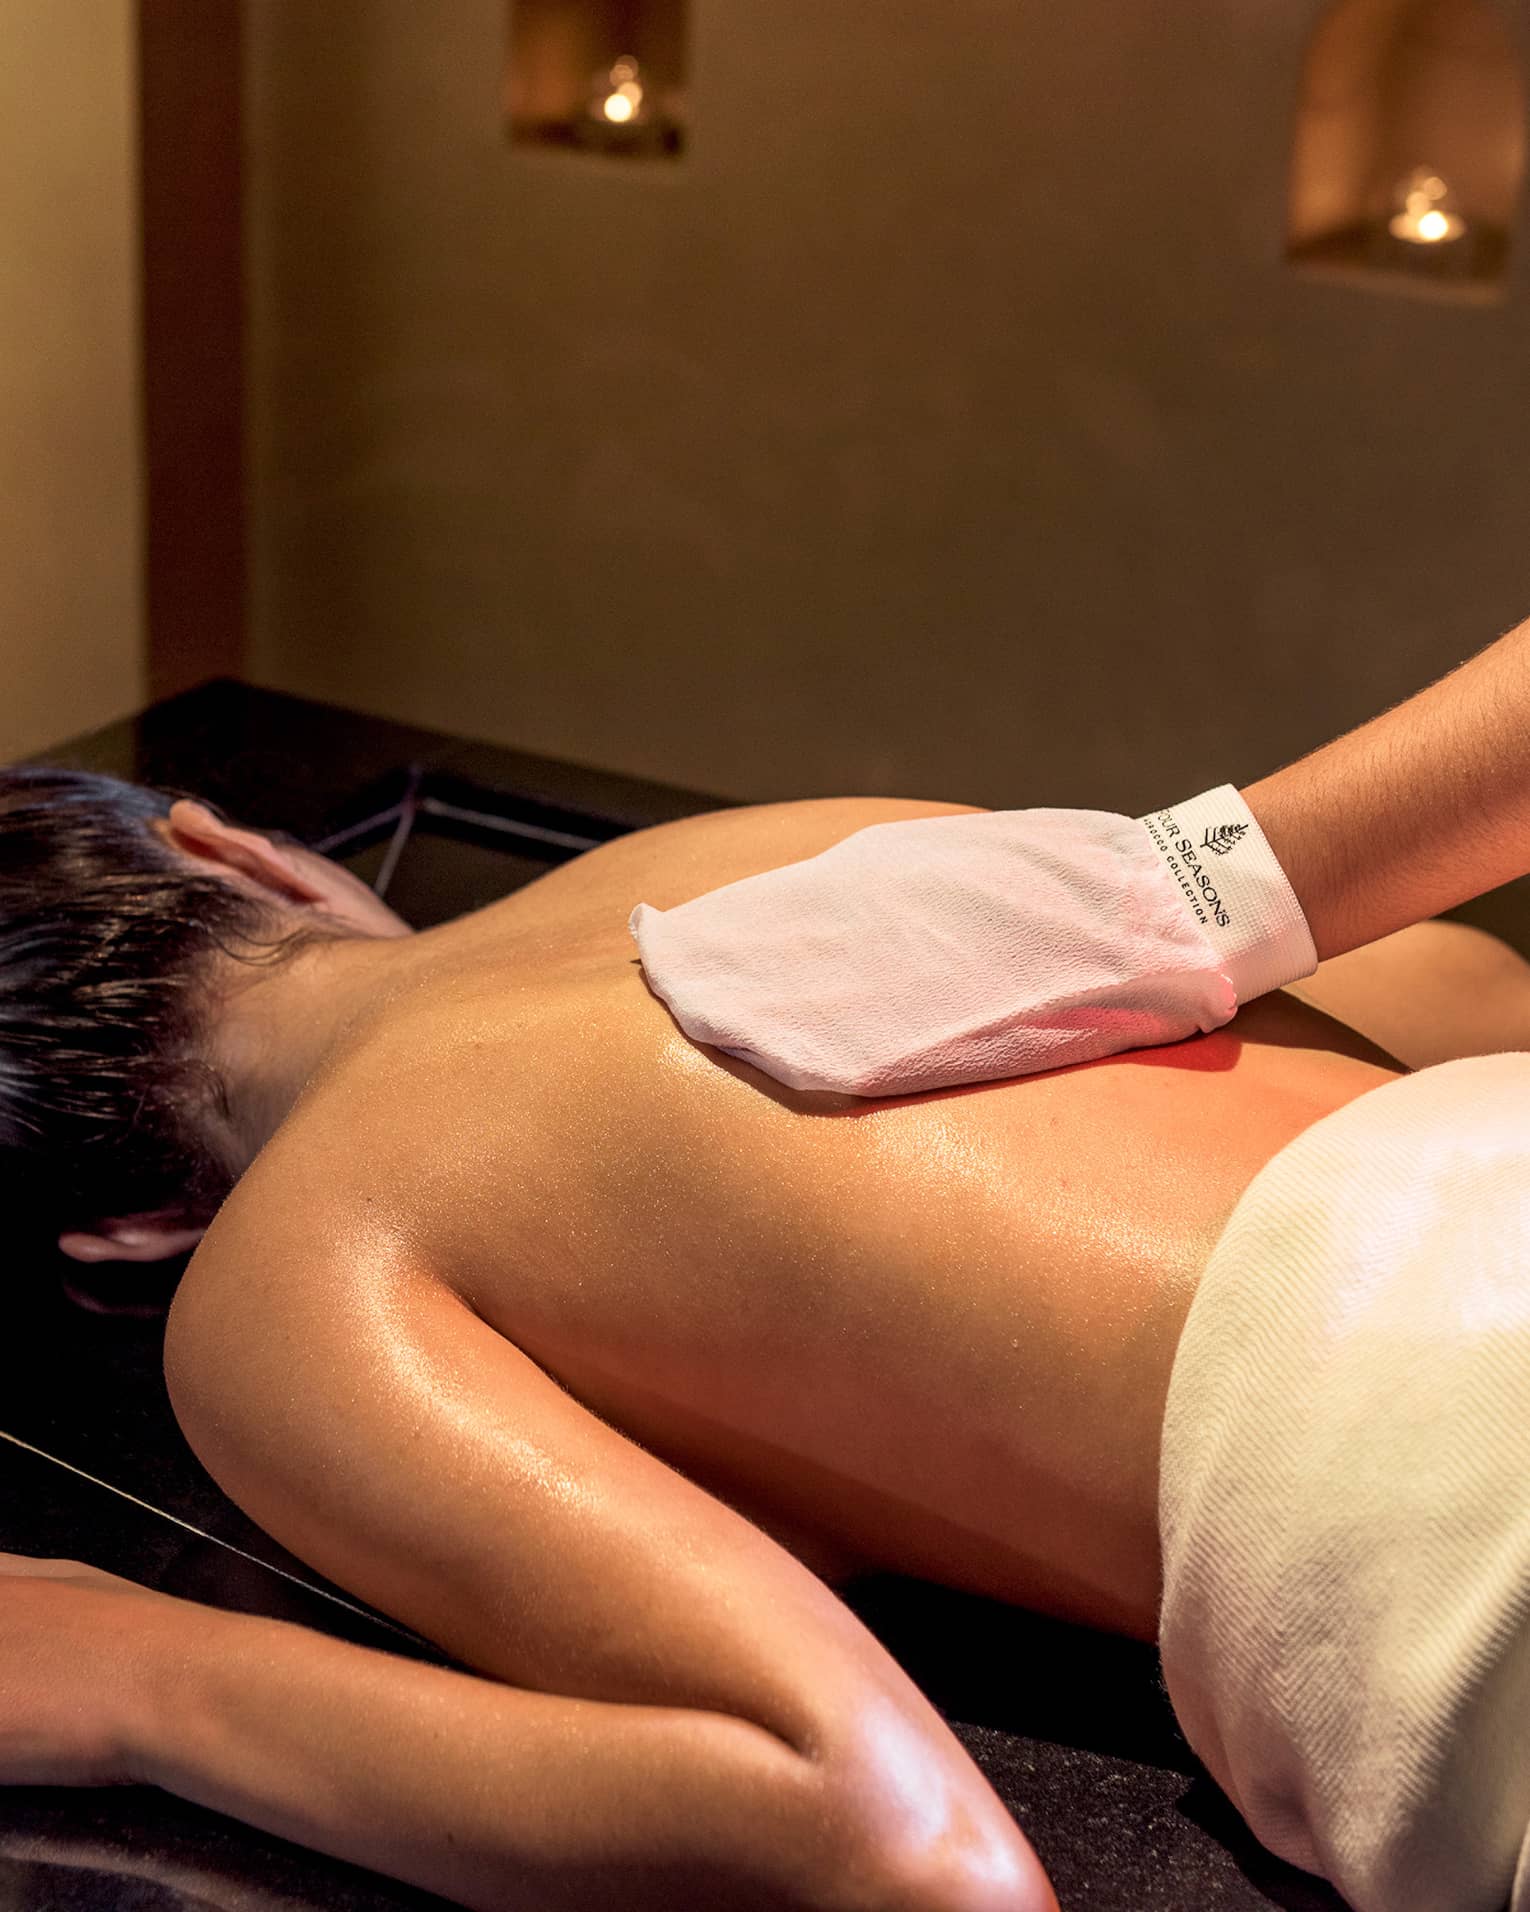 Woman lies face-down on spa table while hand with white mitten massages her back